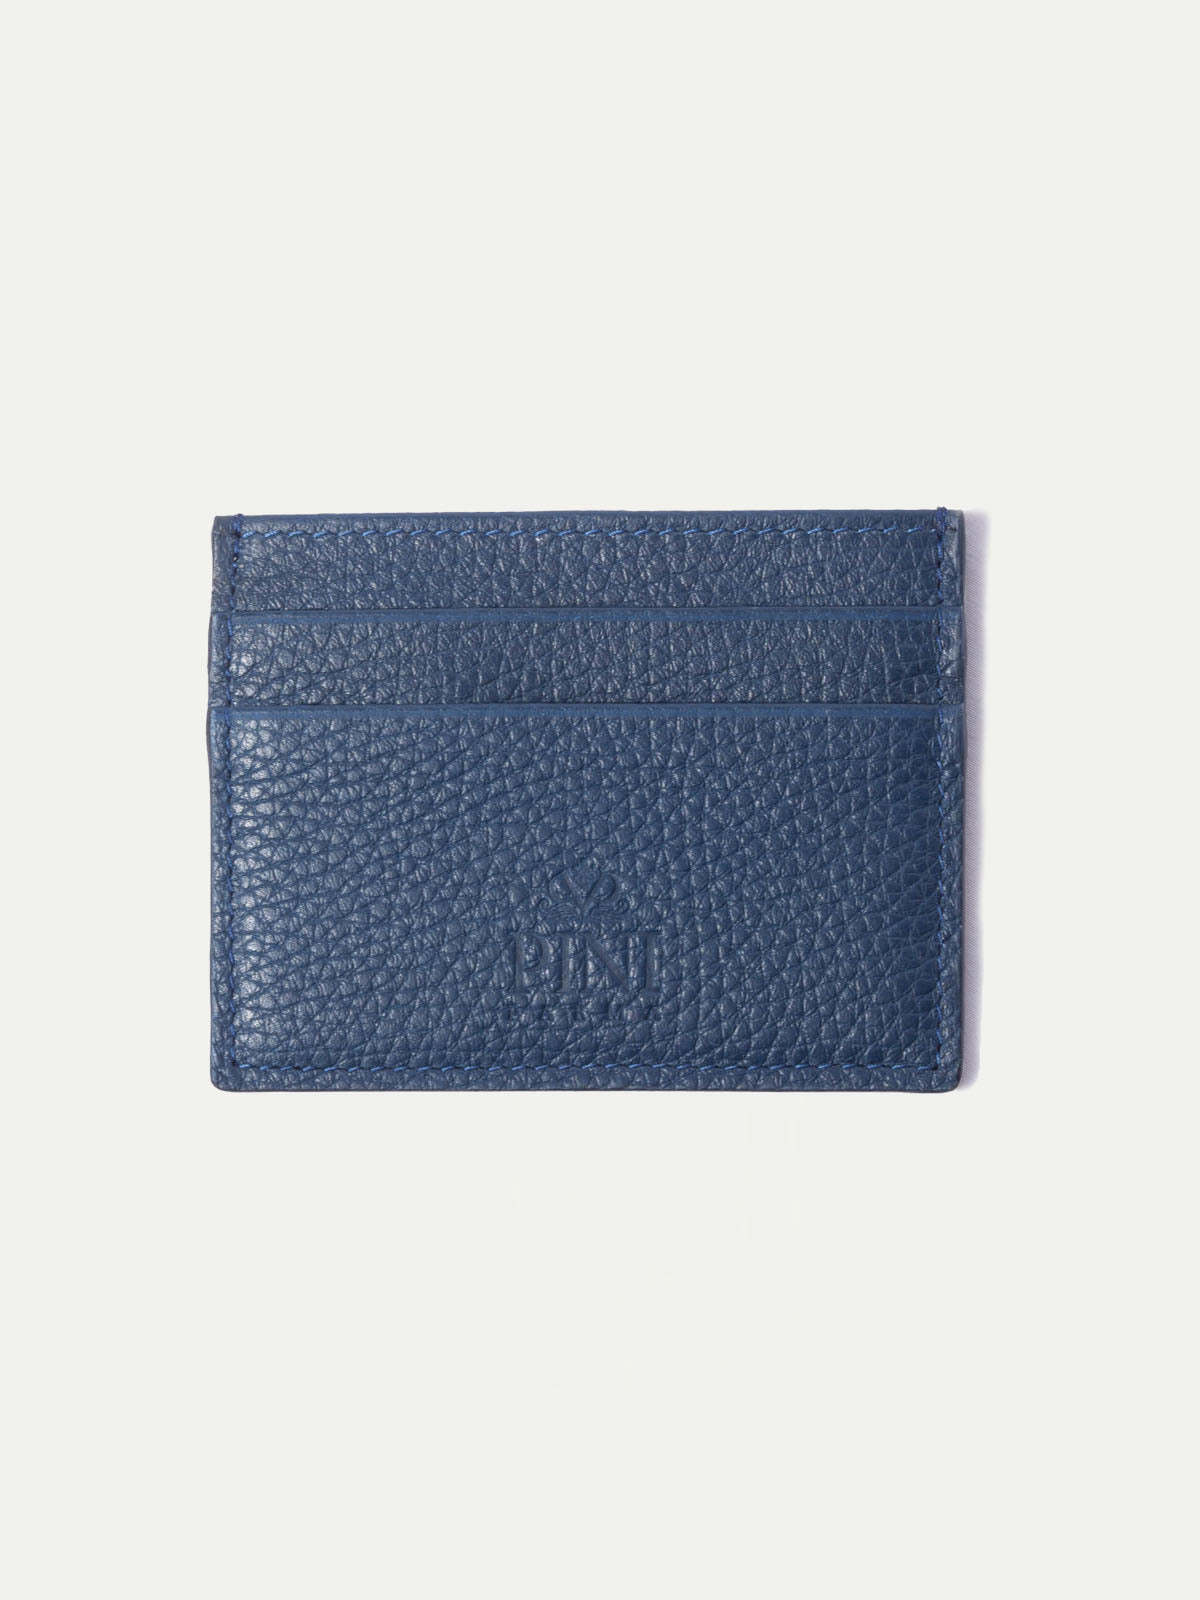 calf leather card holder, calf leather cardholder, blue card holder, blue cardholder, men leather card holder,  men leather cardholder, porte-cartes en cuir, porte-cartes bleu, porte-cartes bleu en cuir, porte-cartes Italien, Italian leather cardholder, Italian leather card holder